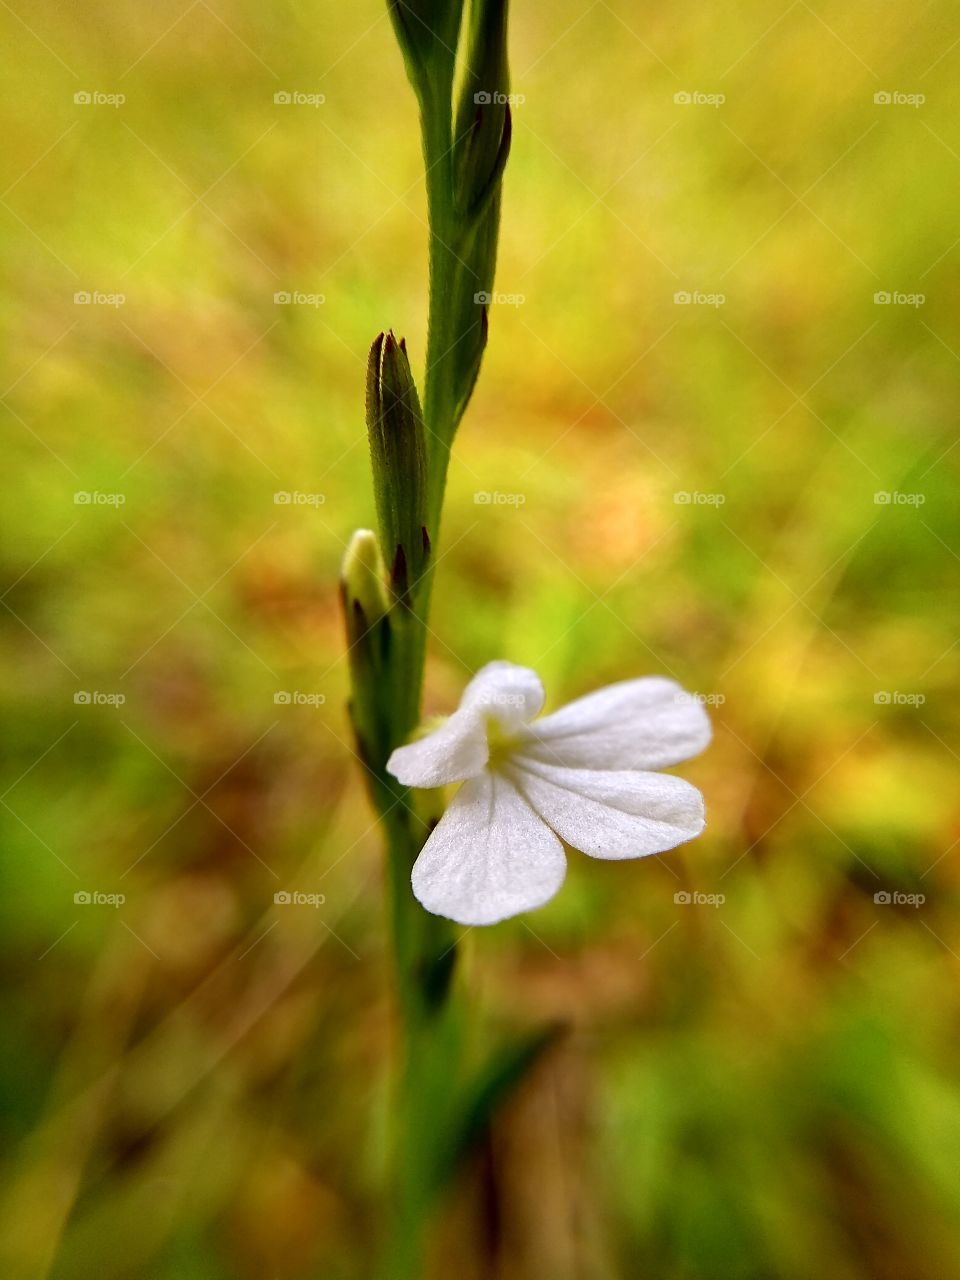 Flower plant of a kind of grass.